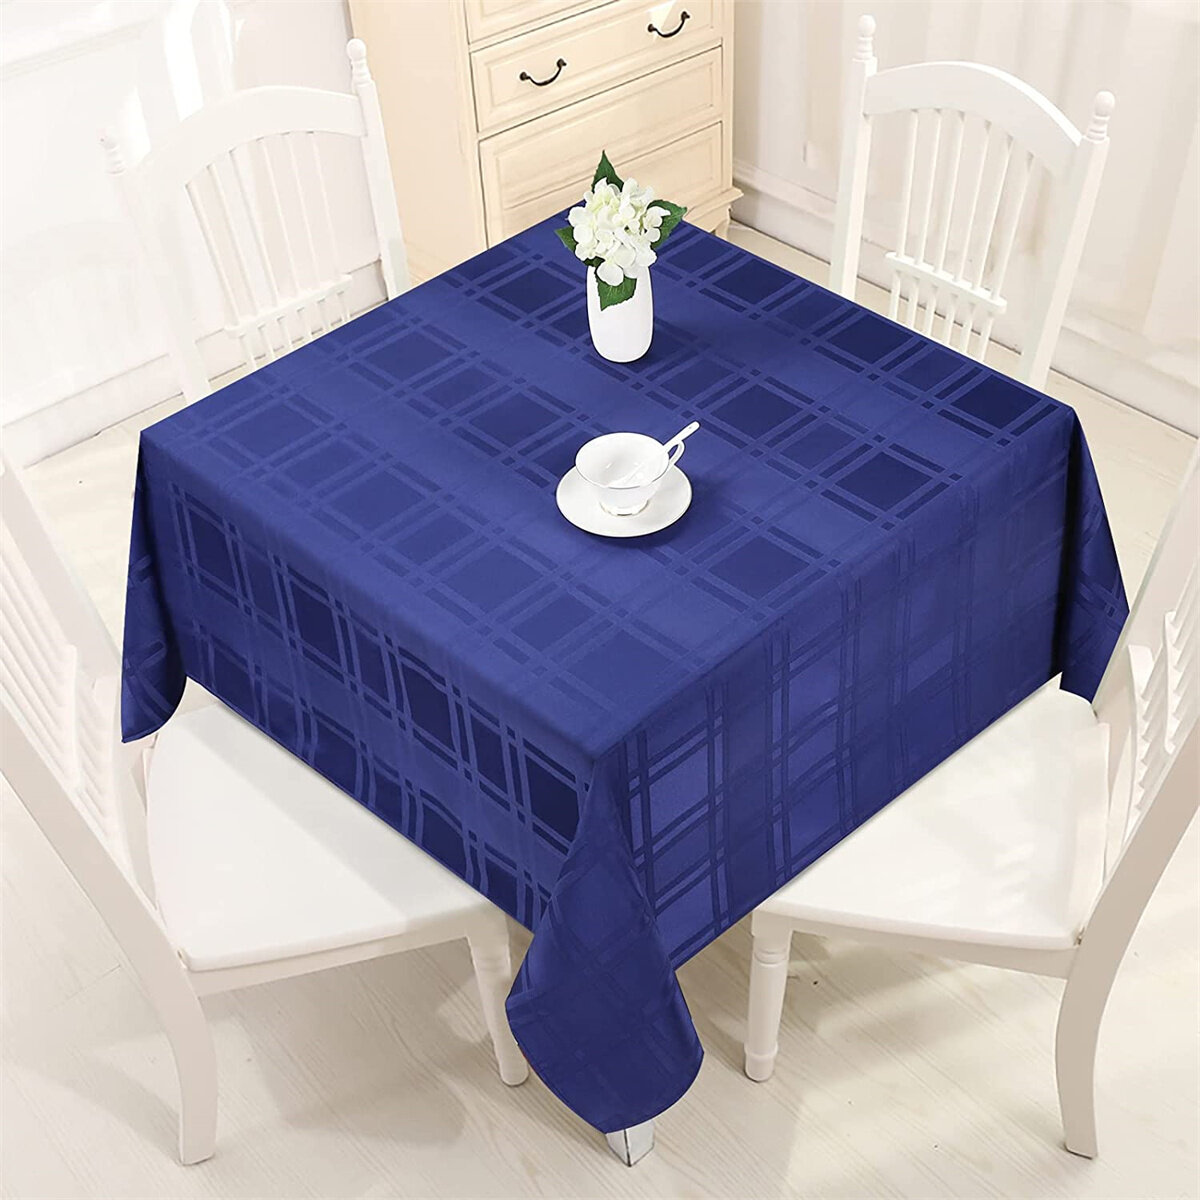 Modern Plaid Jacquard Rectangle Table Cloth Waterproof and Spill Resistance Heav 